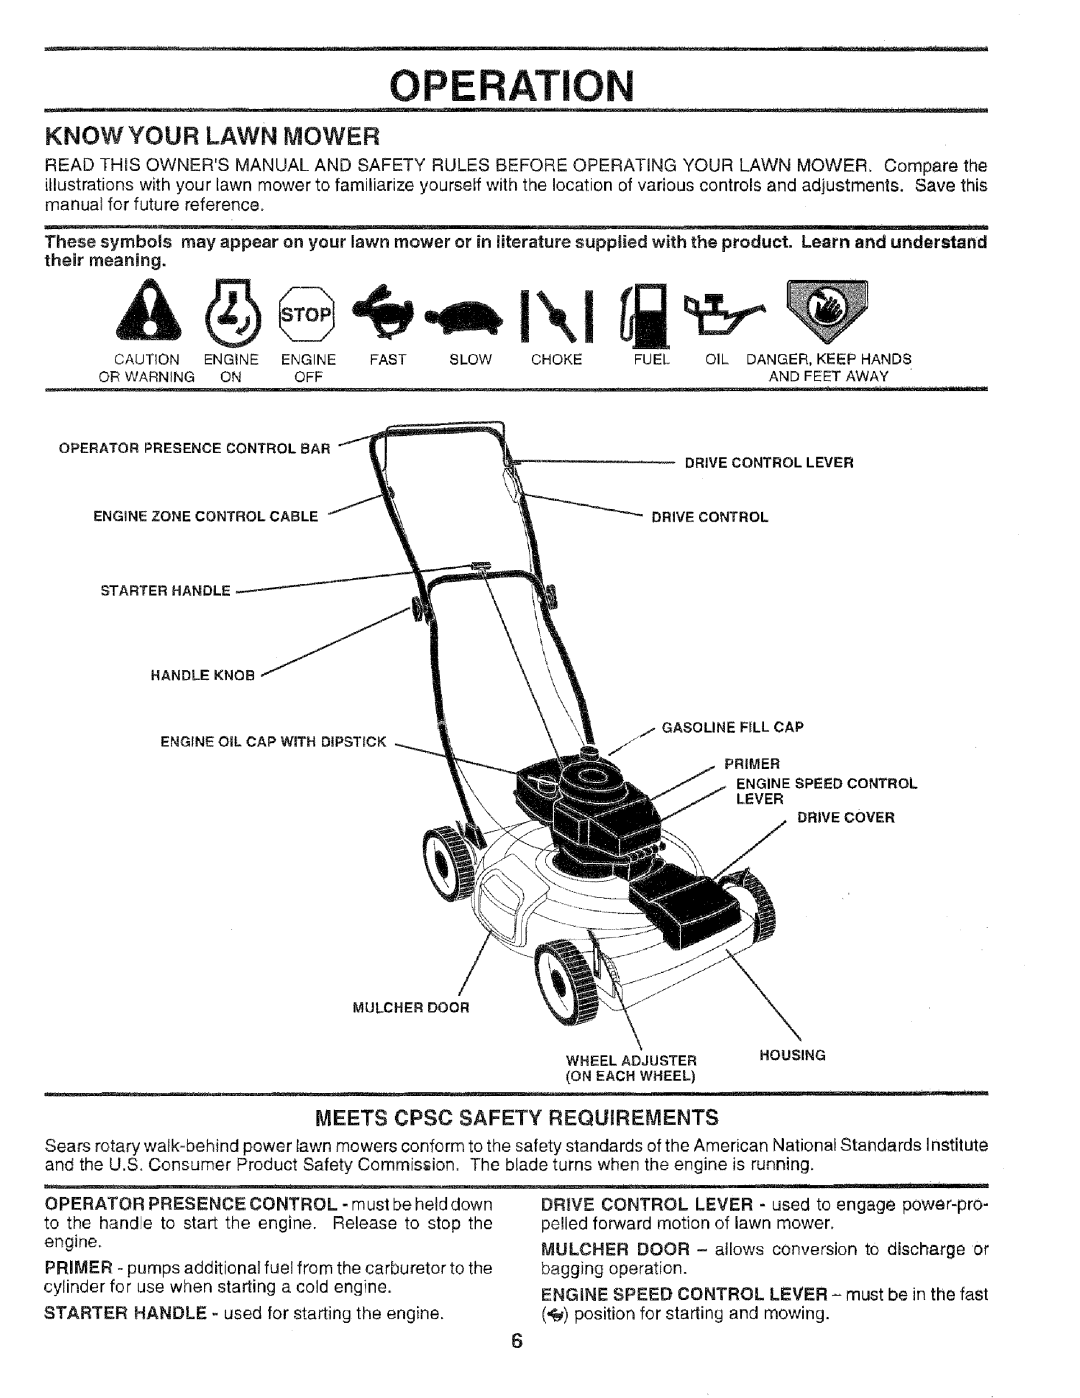 Sears 975502, 917.377201, 14.3 owner manual Know Your Lawn Mower, Meets Cpsc Safety Requirements 